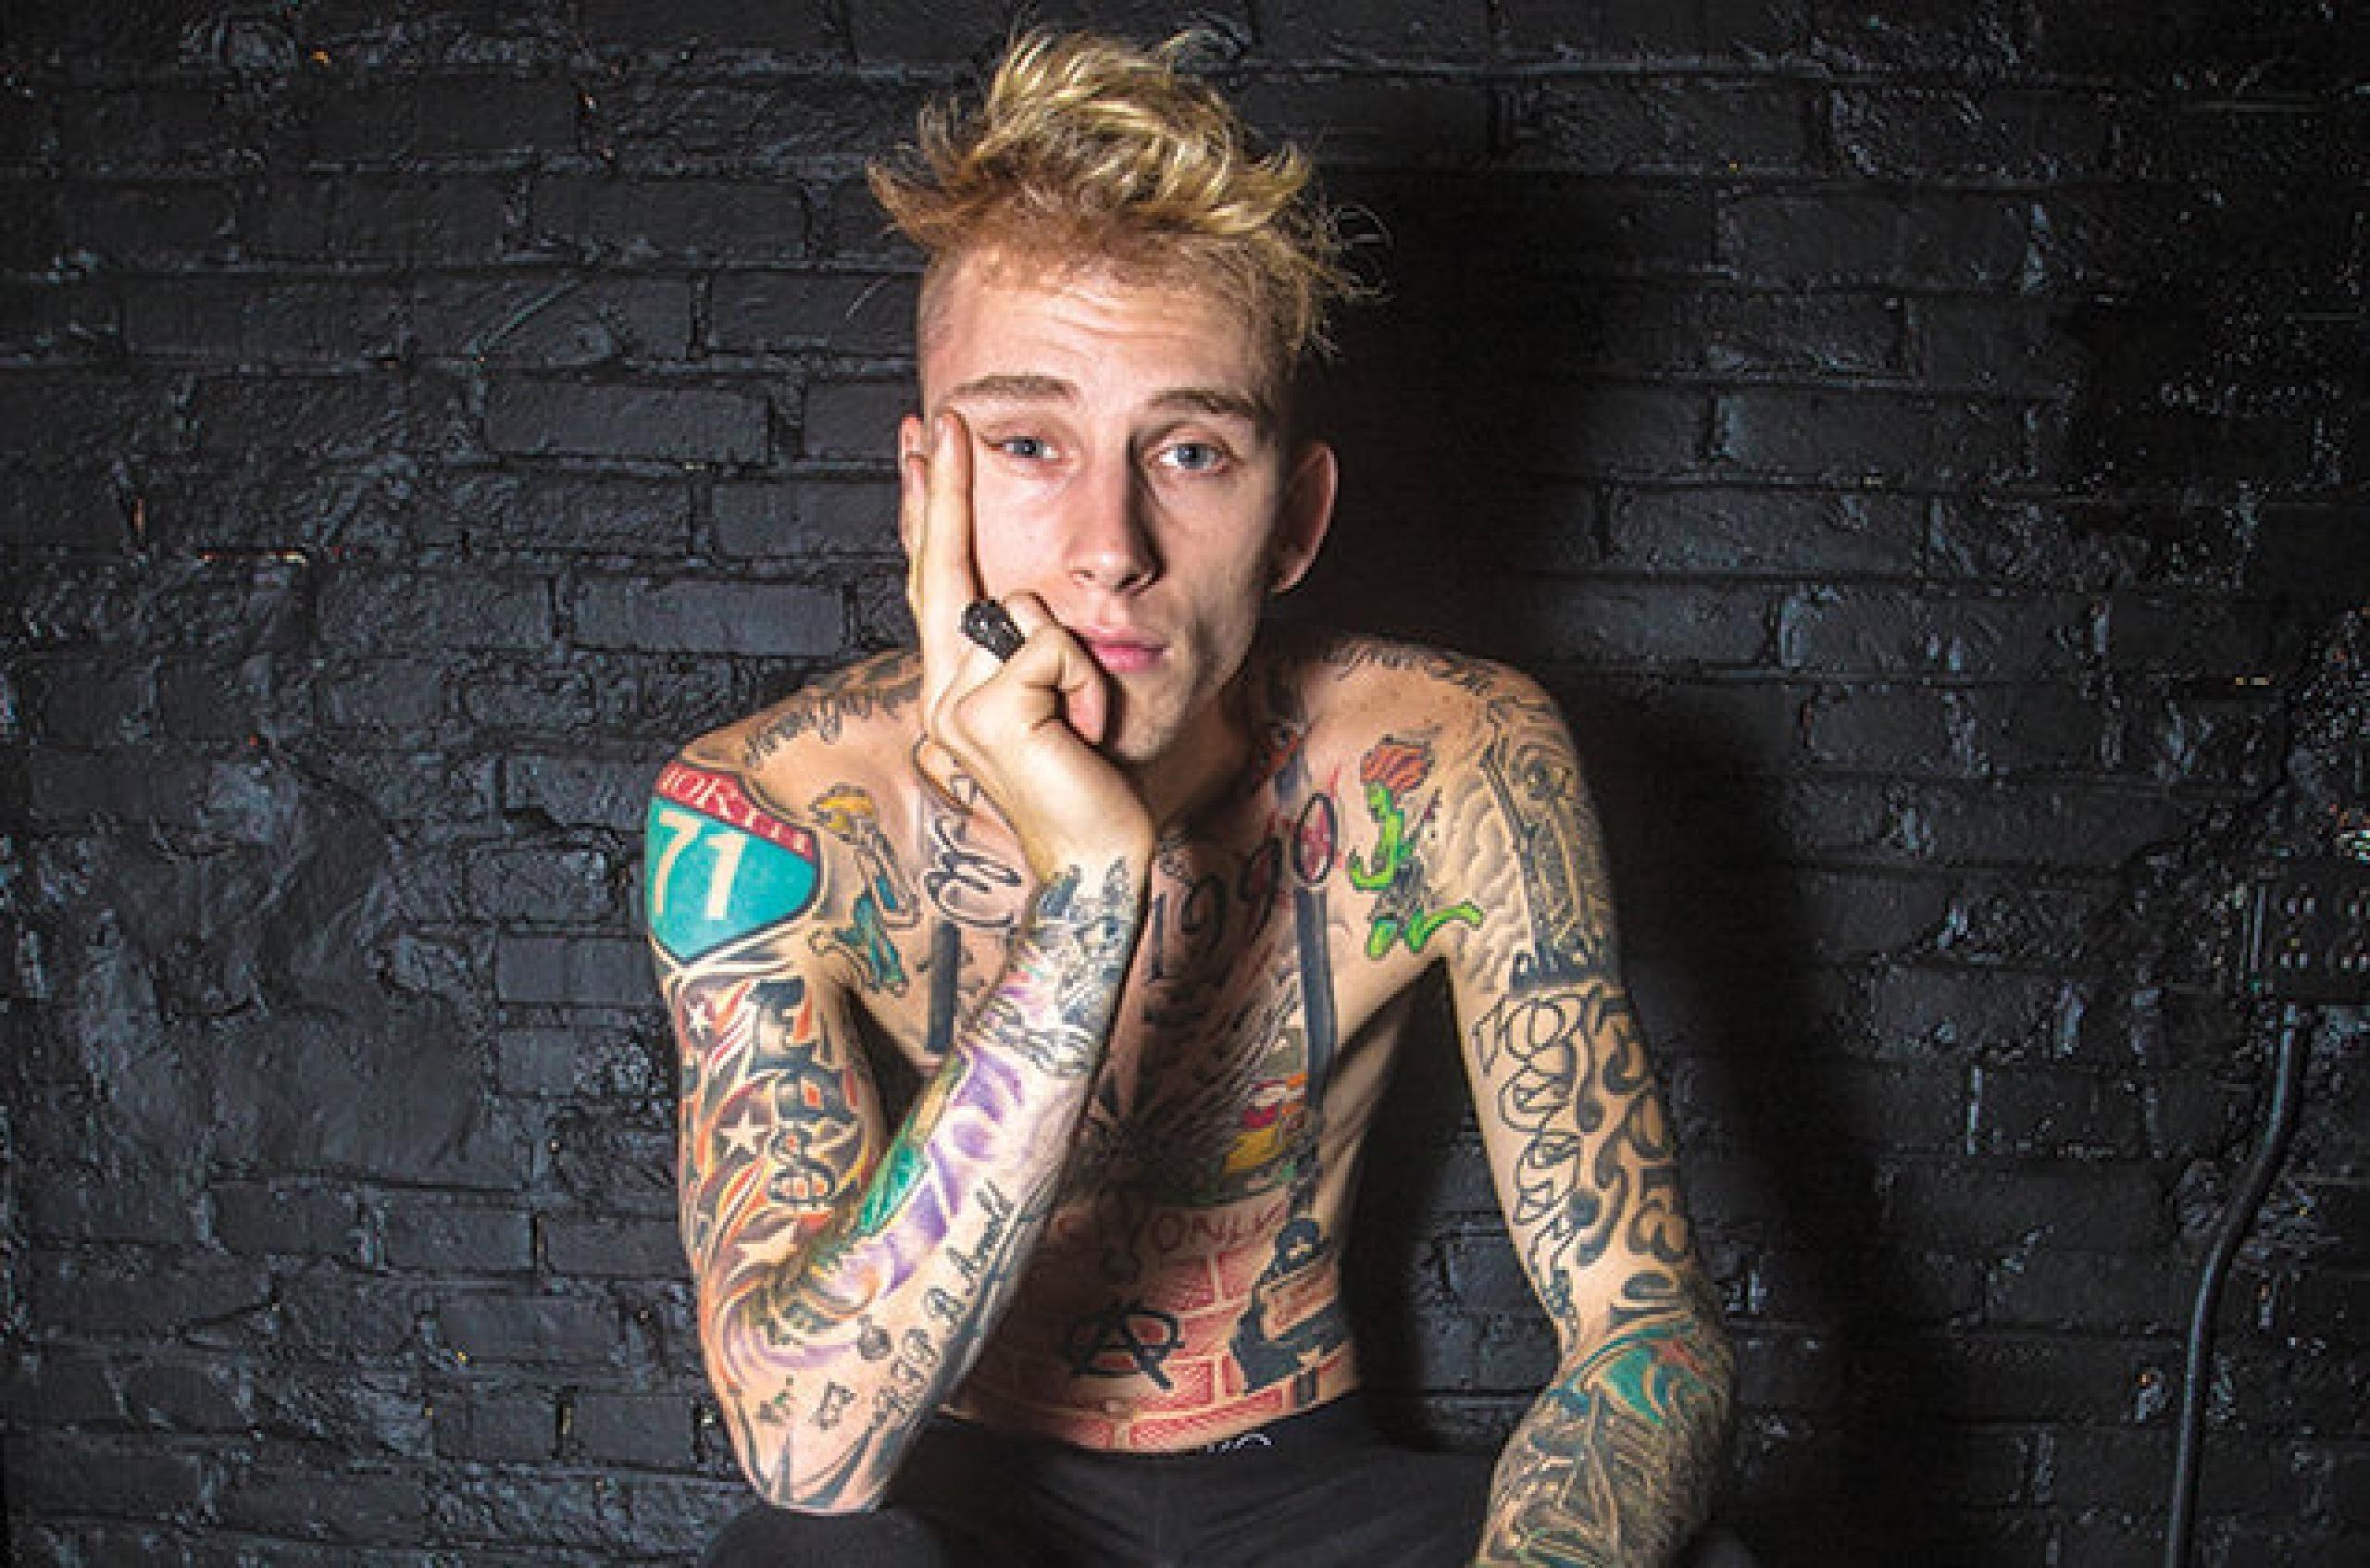 New Image Of Machine Gun Kelly FULL HD 1080p For PC Background